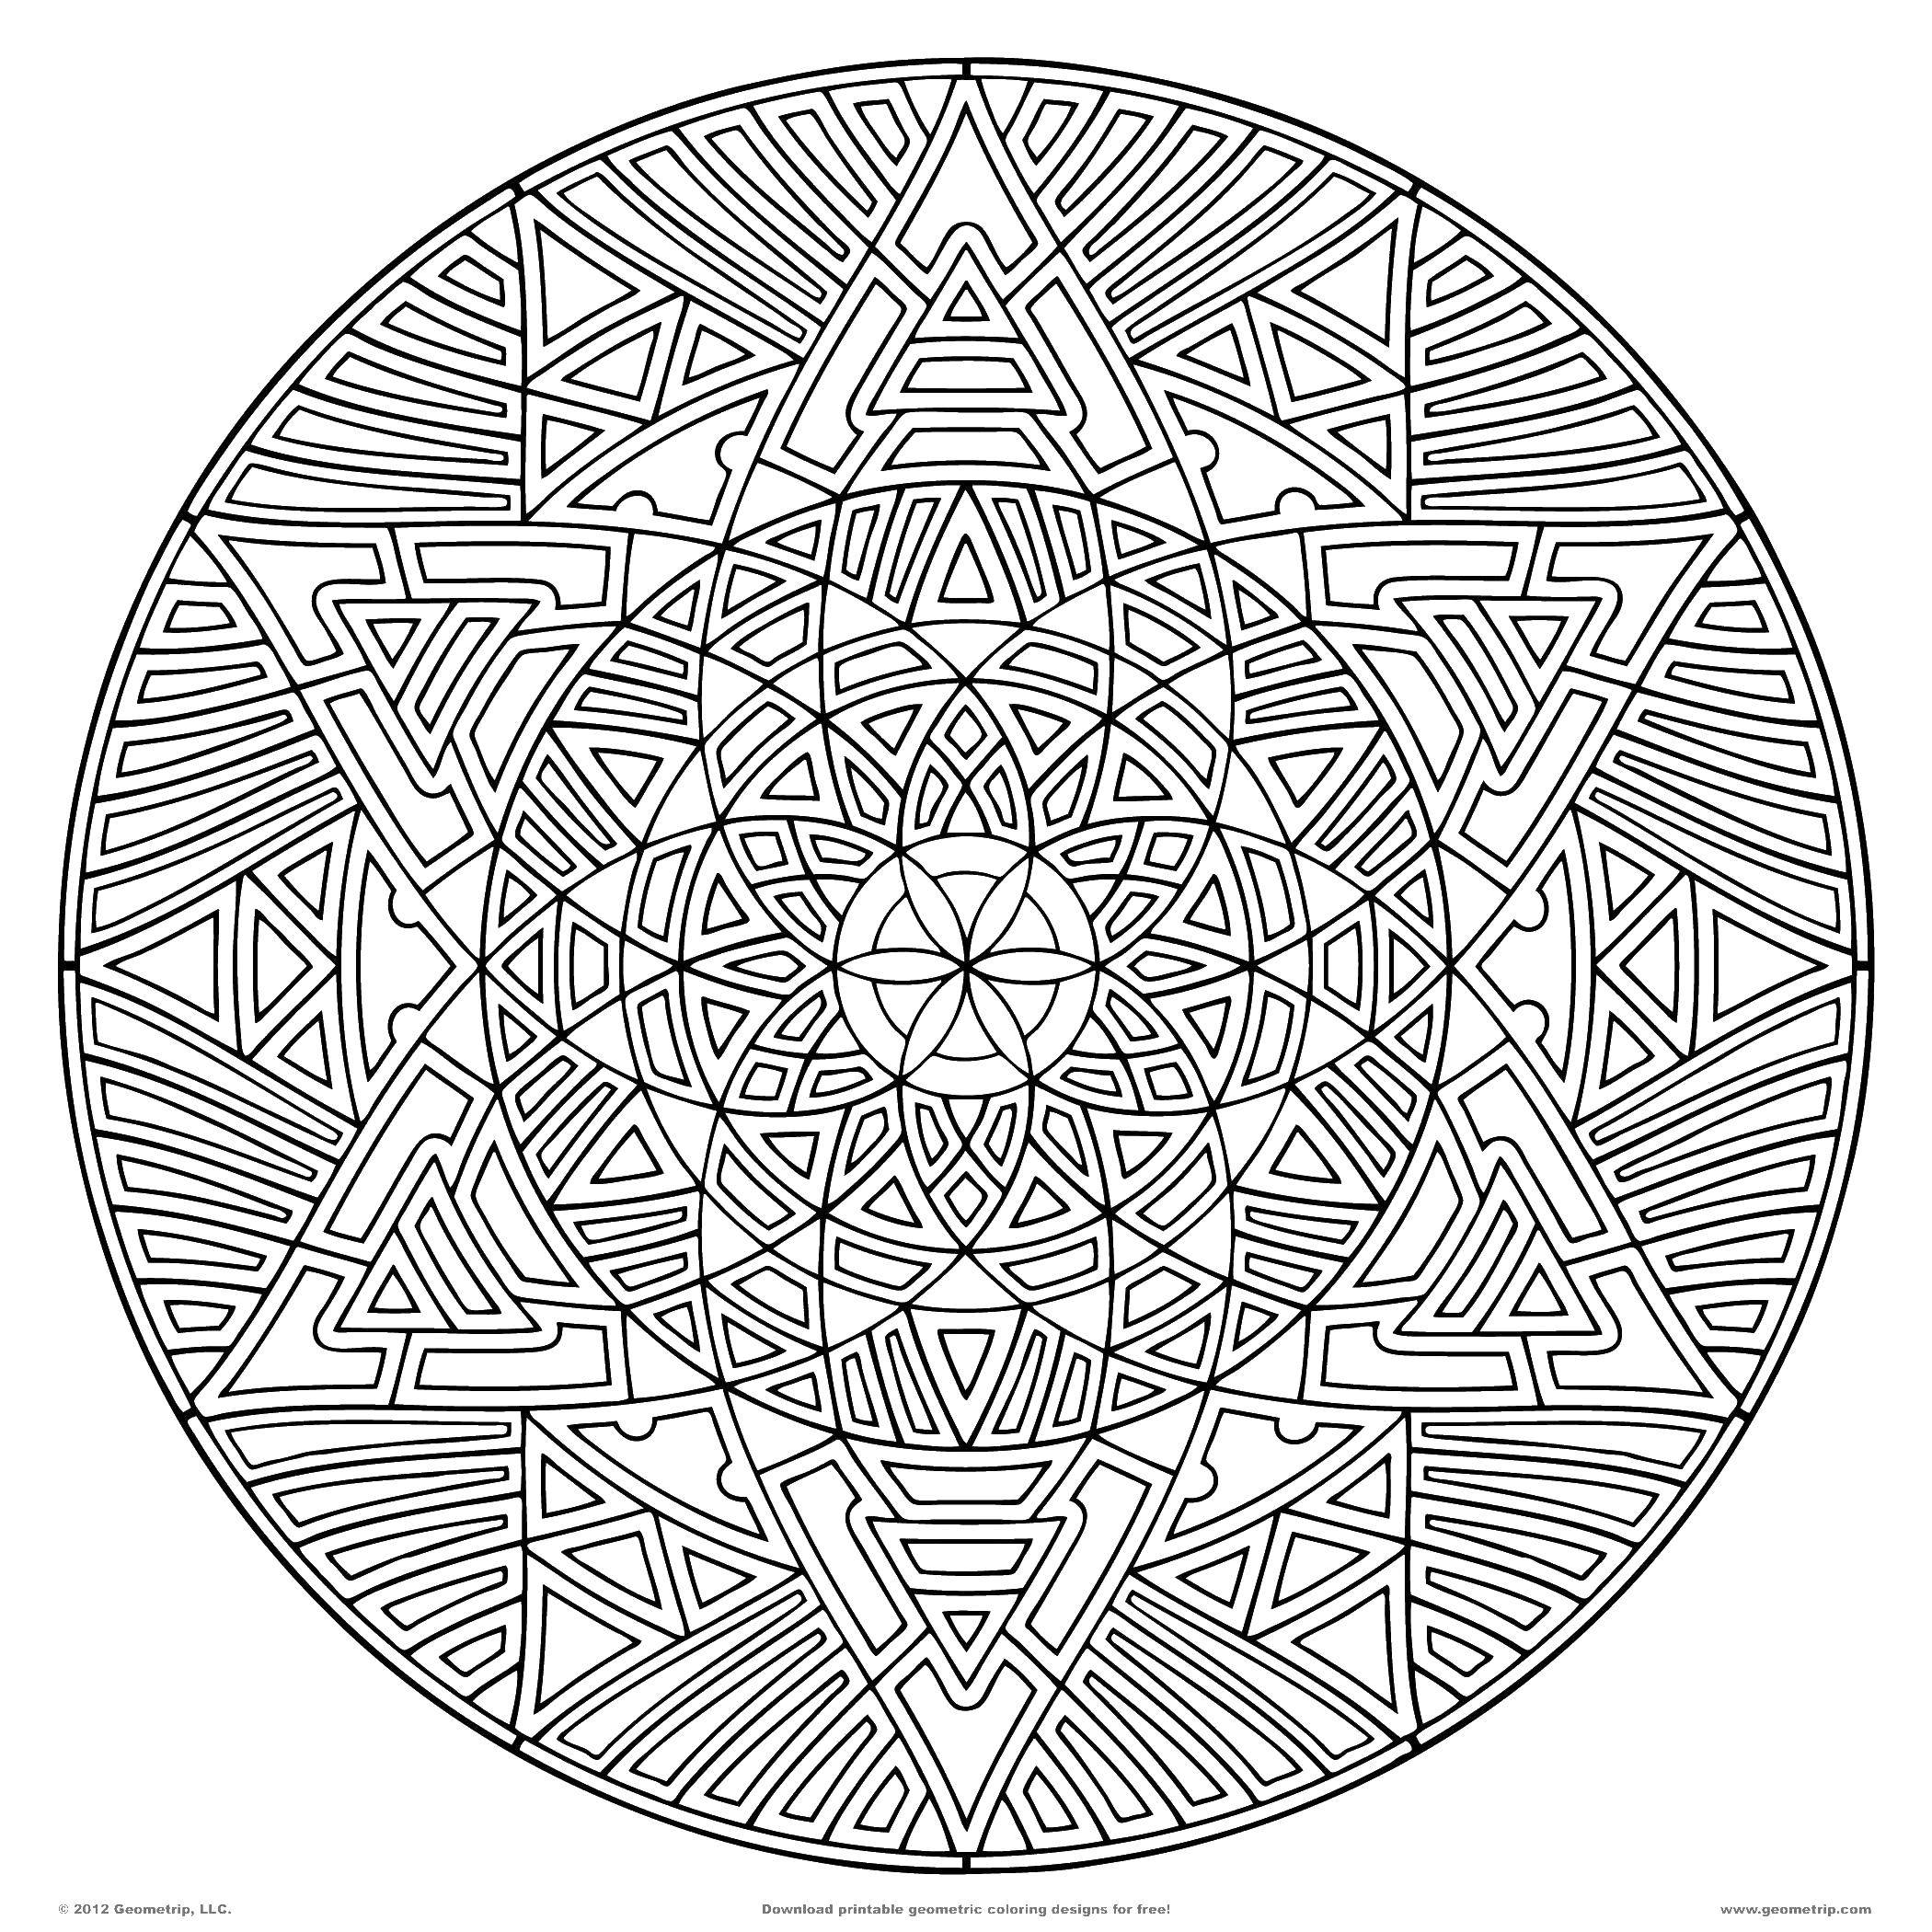 Coloring Patterned circle. Category patterns. Tags:  Patterns, geometric.